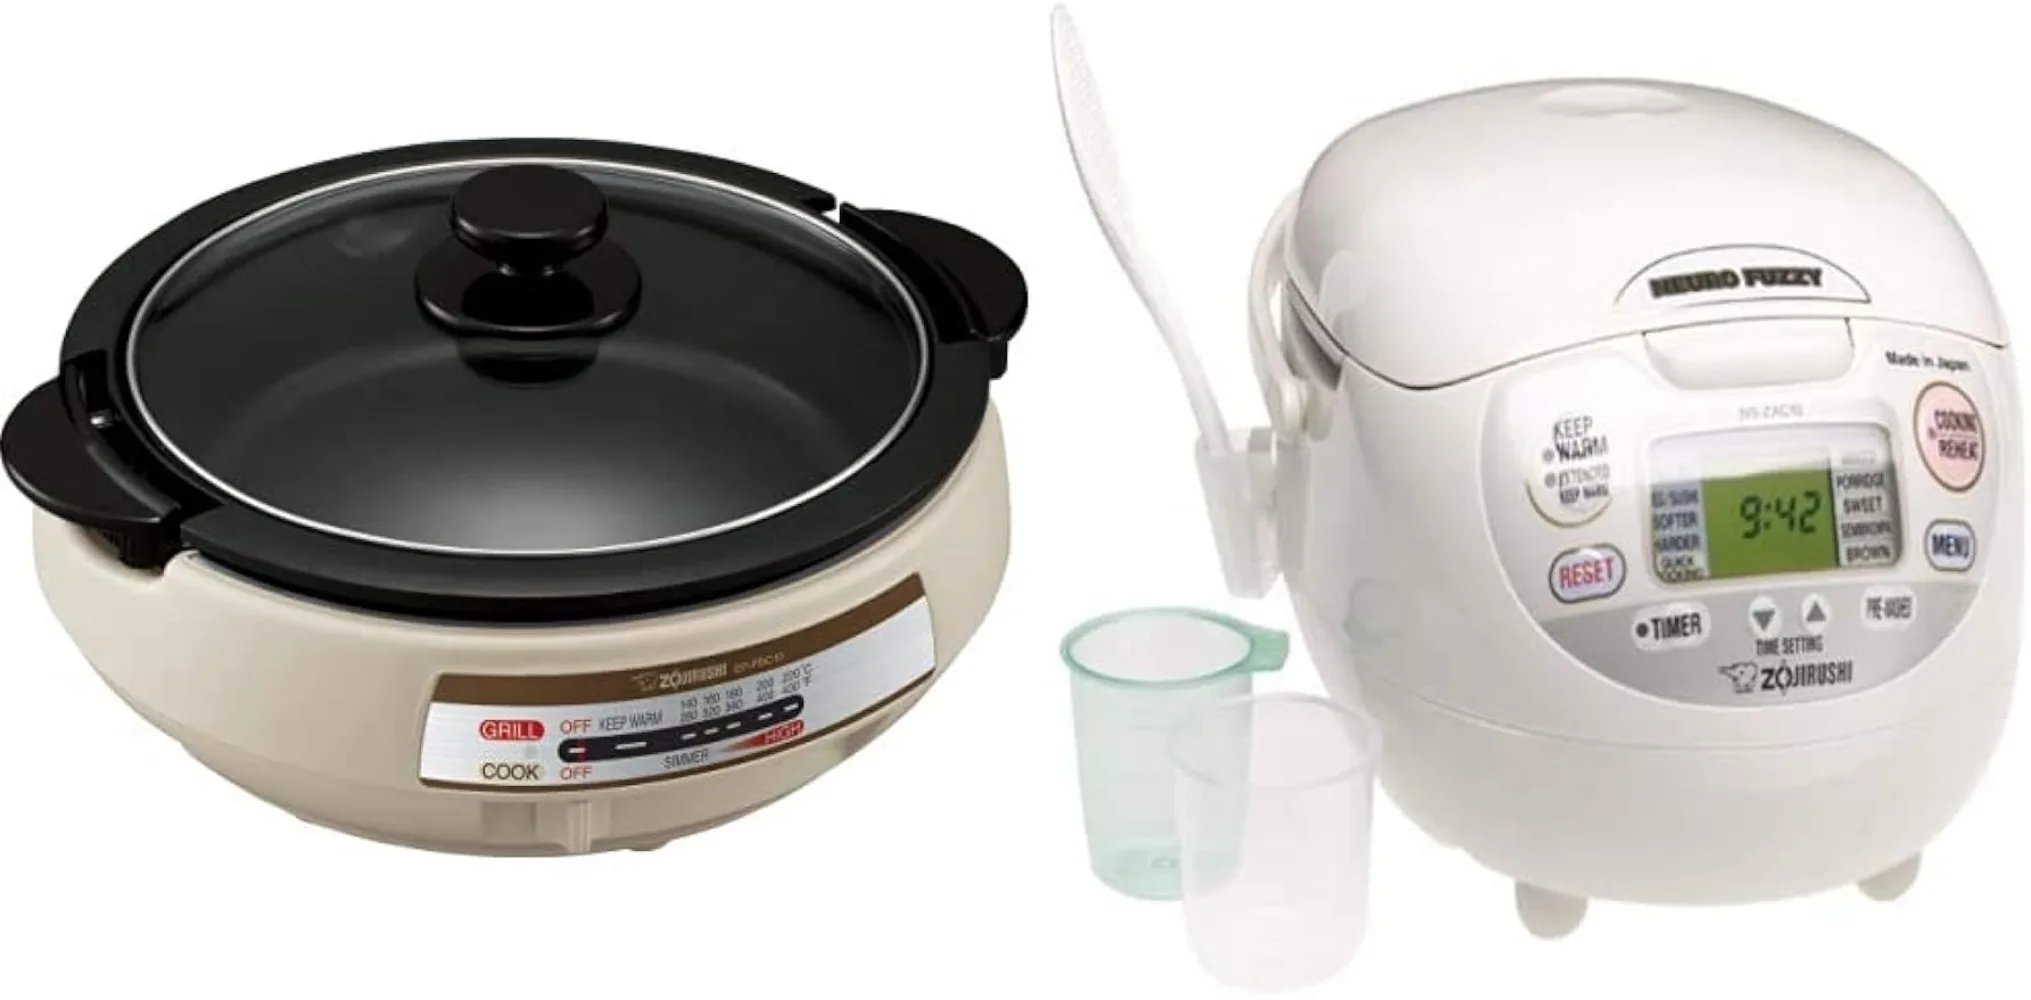 

EP-PBC10 Gourmet d'Expert Electric Skillet & NS-ZCC10 Neuro Fuzzy Rice Cooker, 5.5-Cup, White